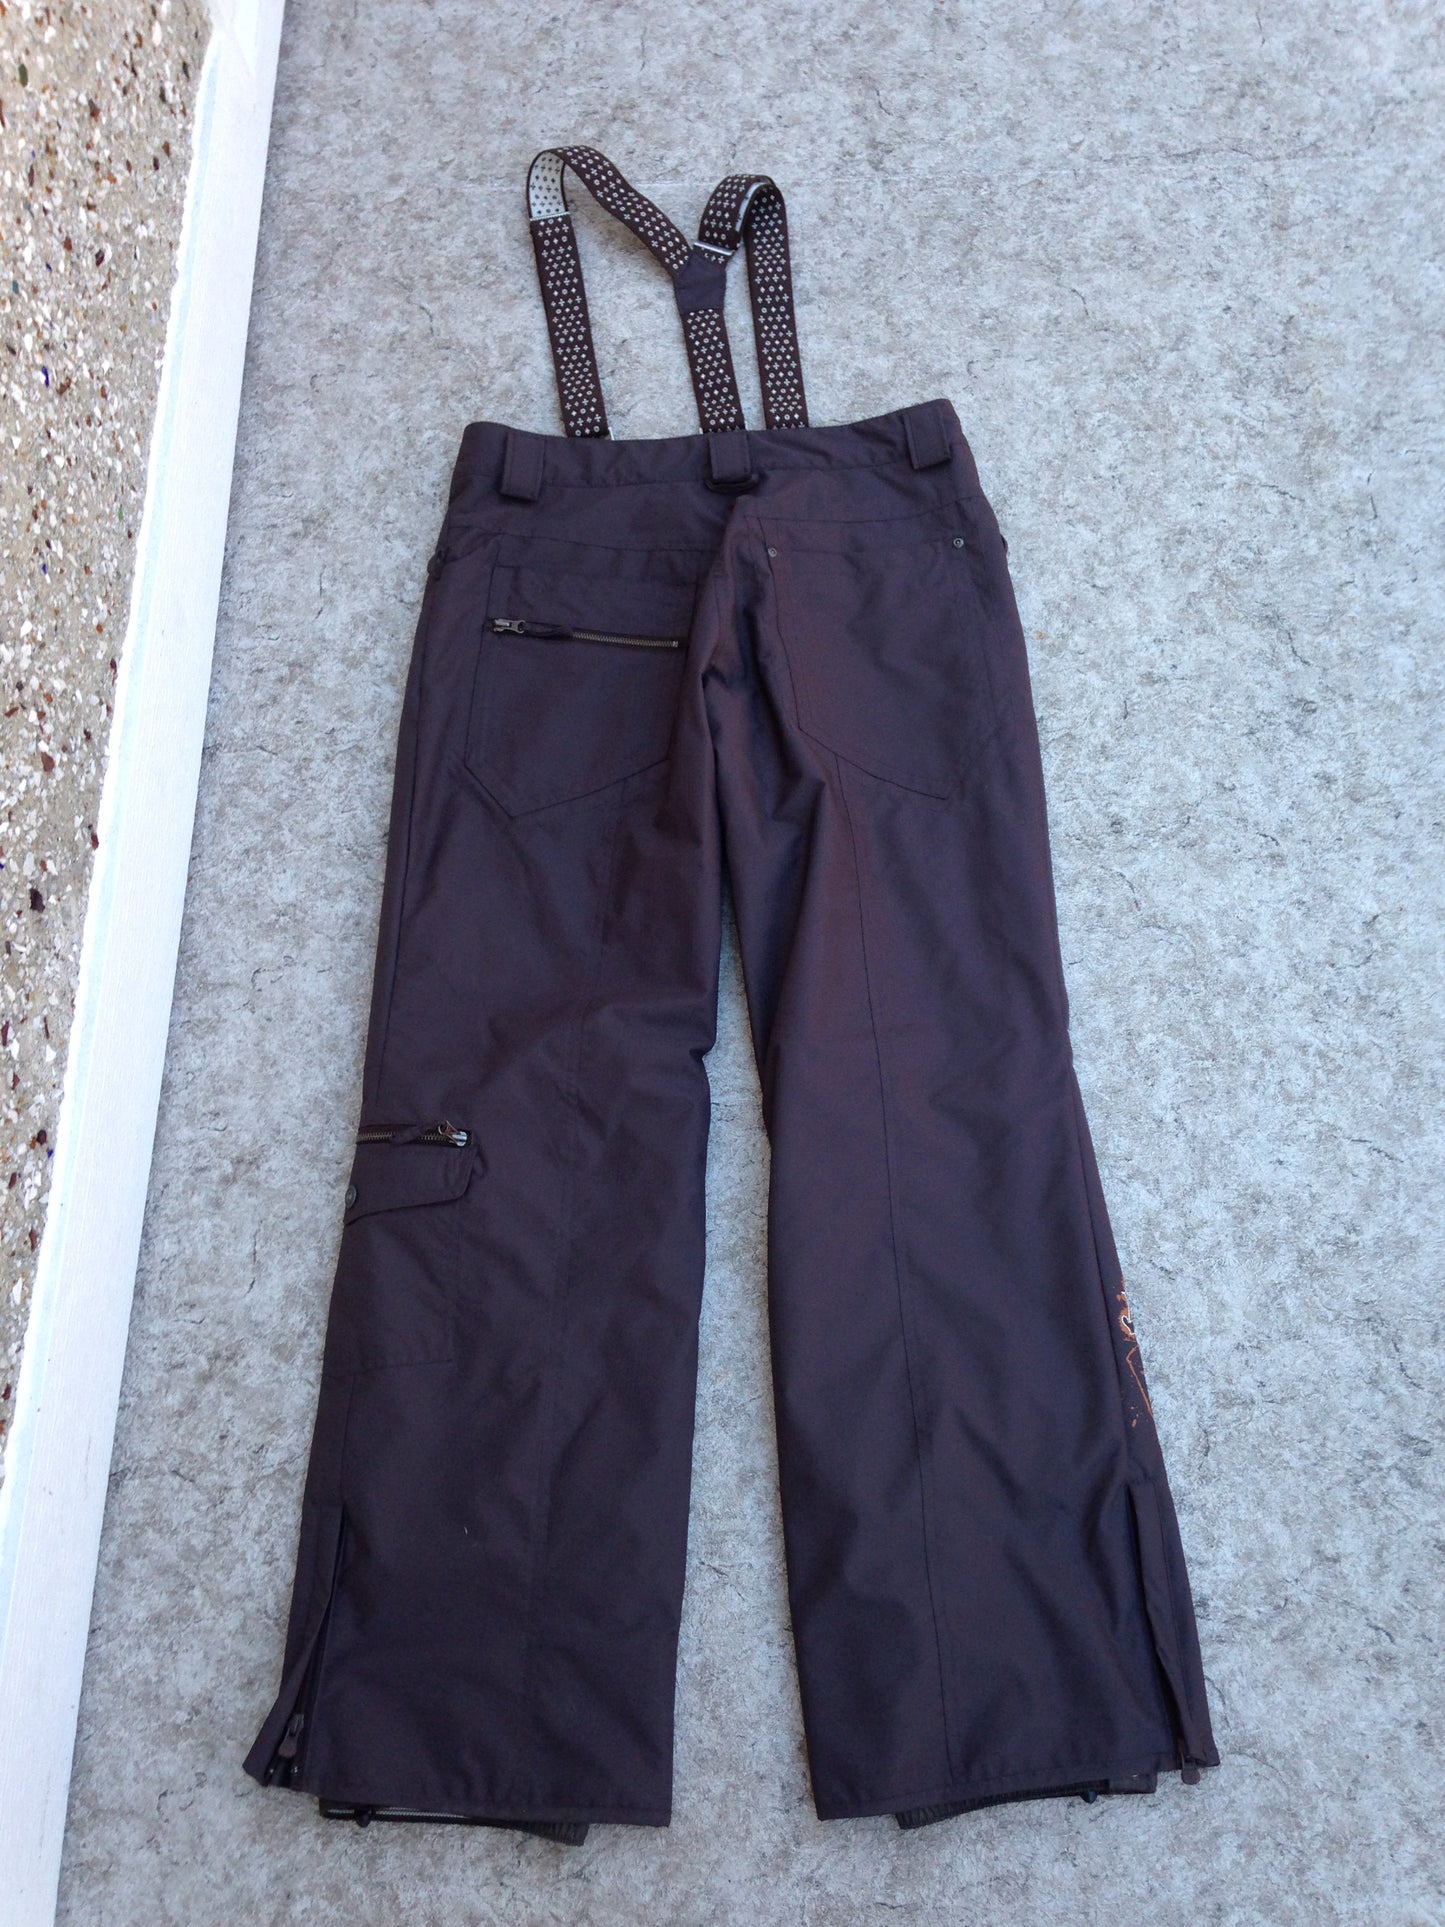 Snow Pants Ladies Size Large Powder Room Cocoa With Straps New Demo Model